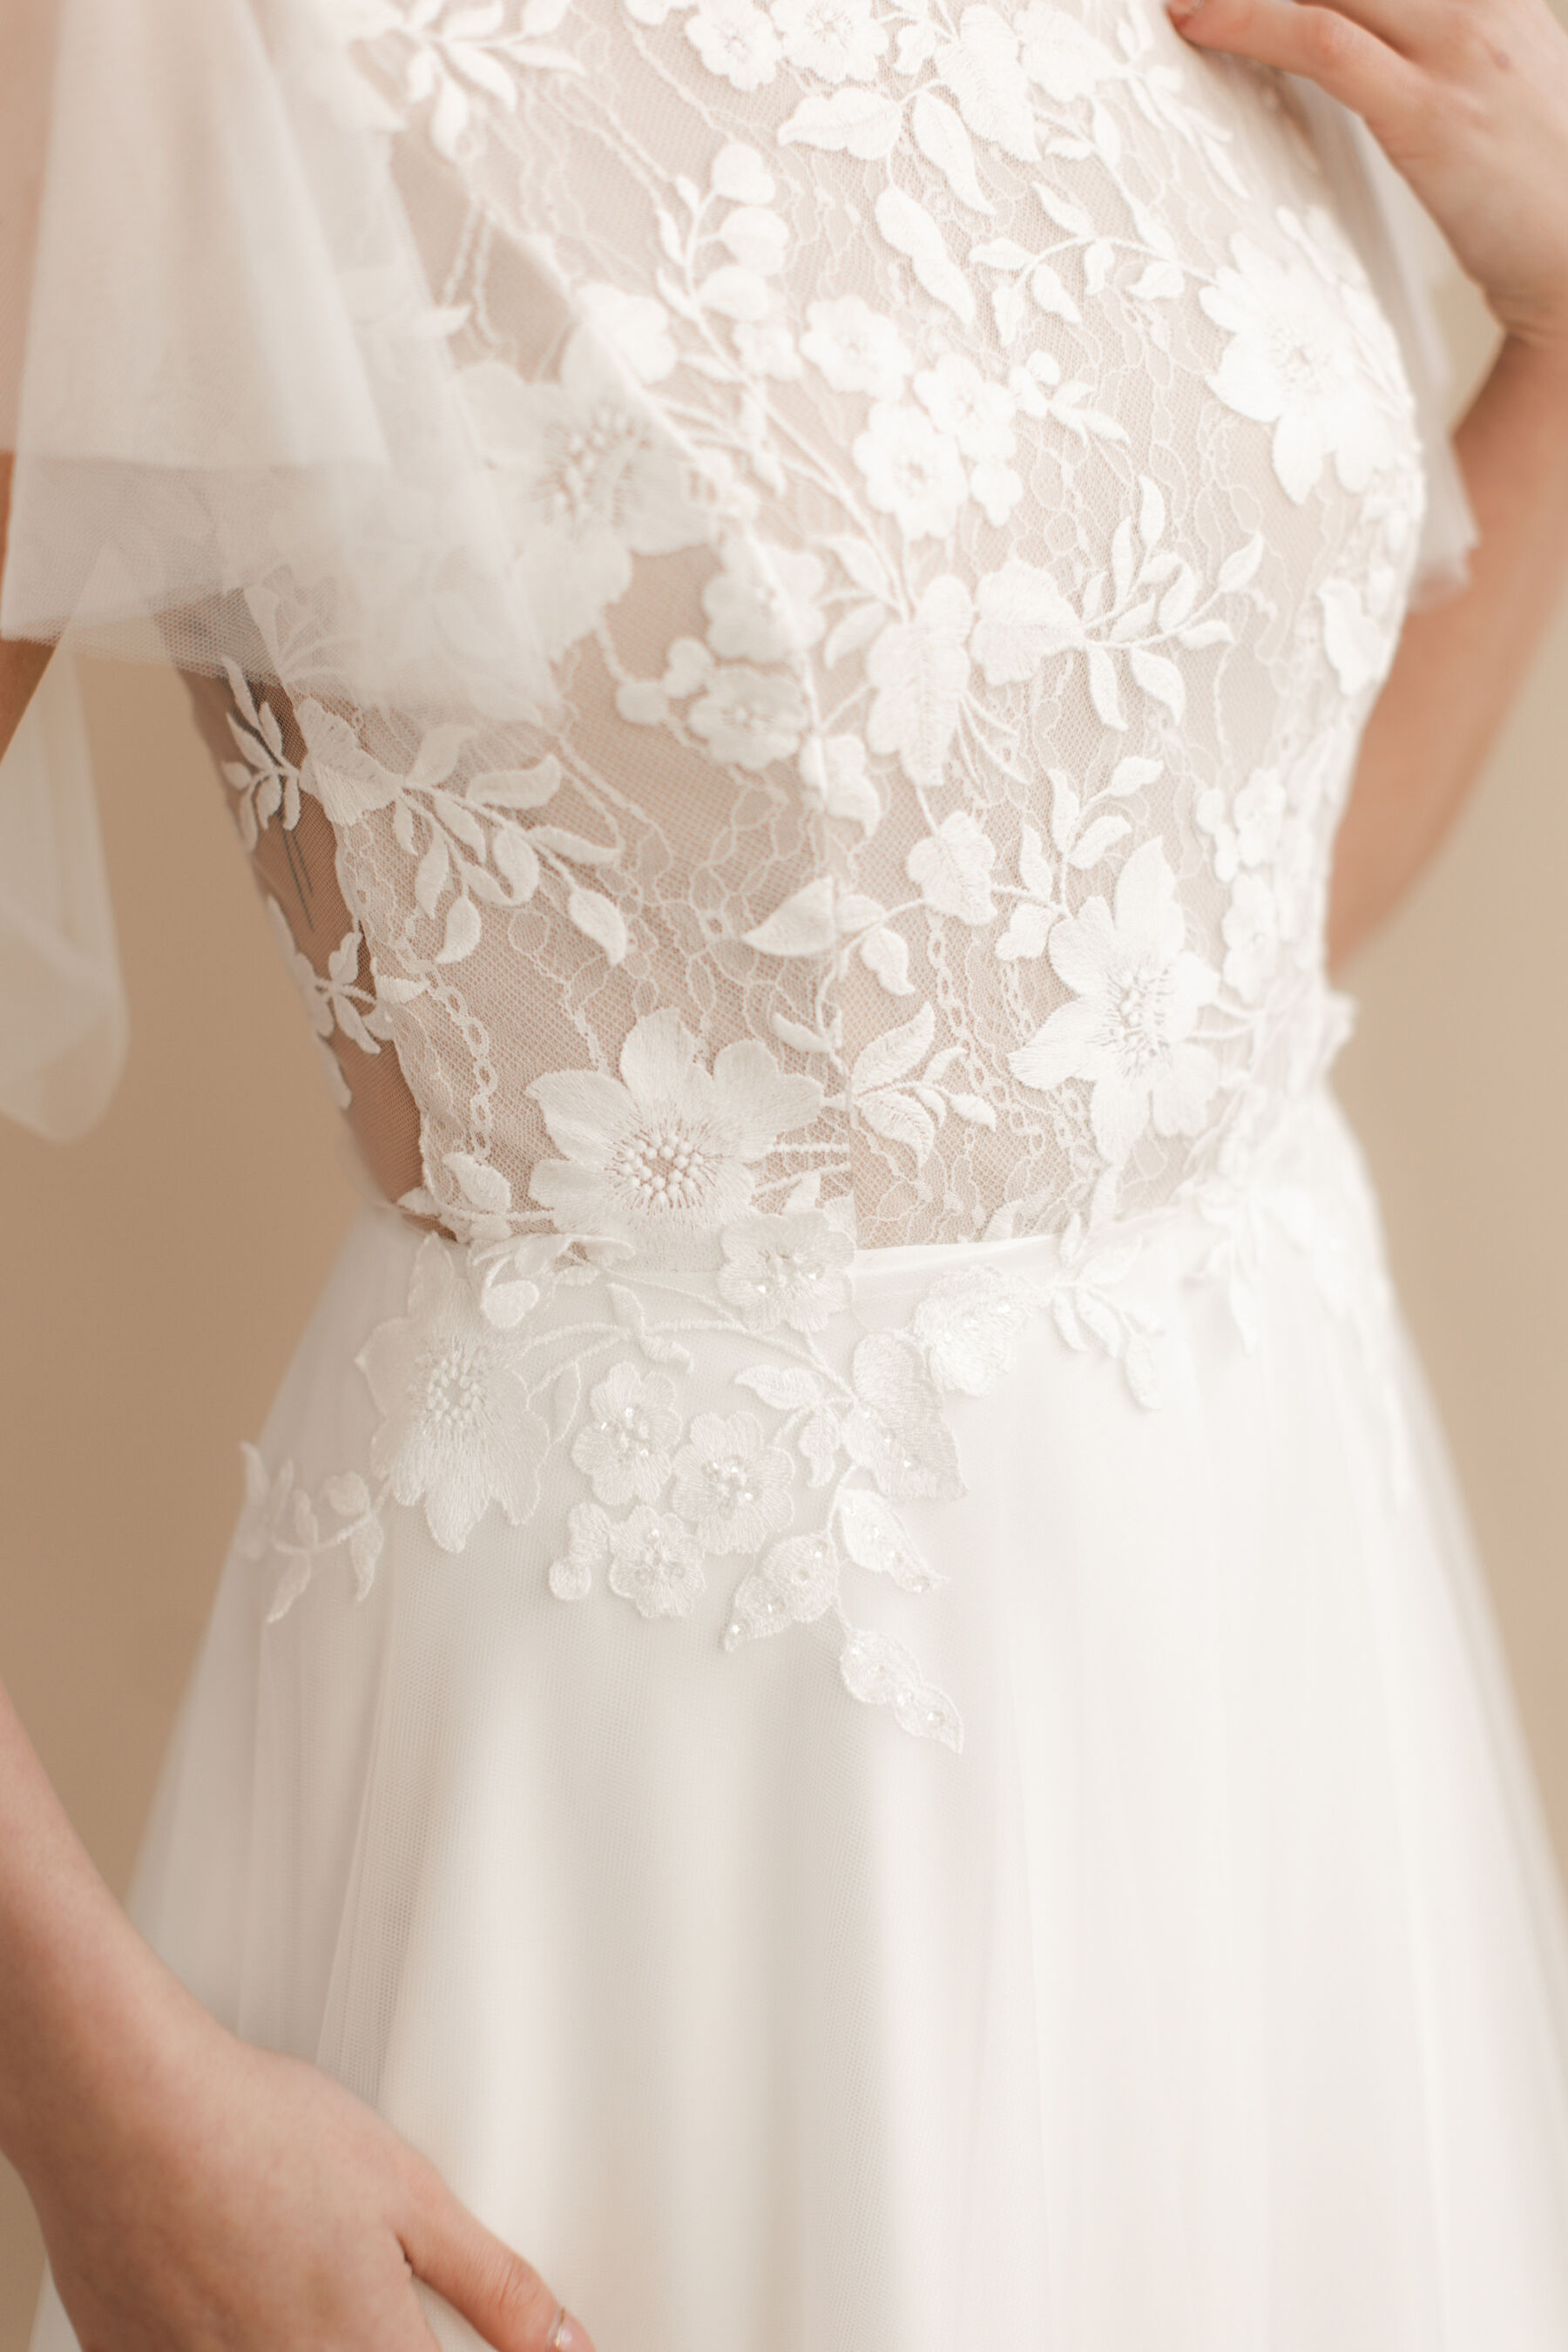 Kate Fearnley wedding dress - tulle sleeves and floral bodice